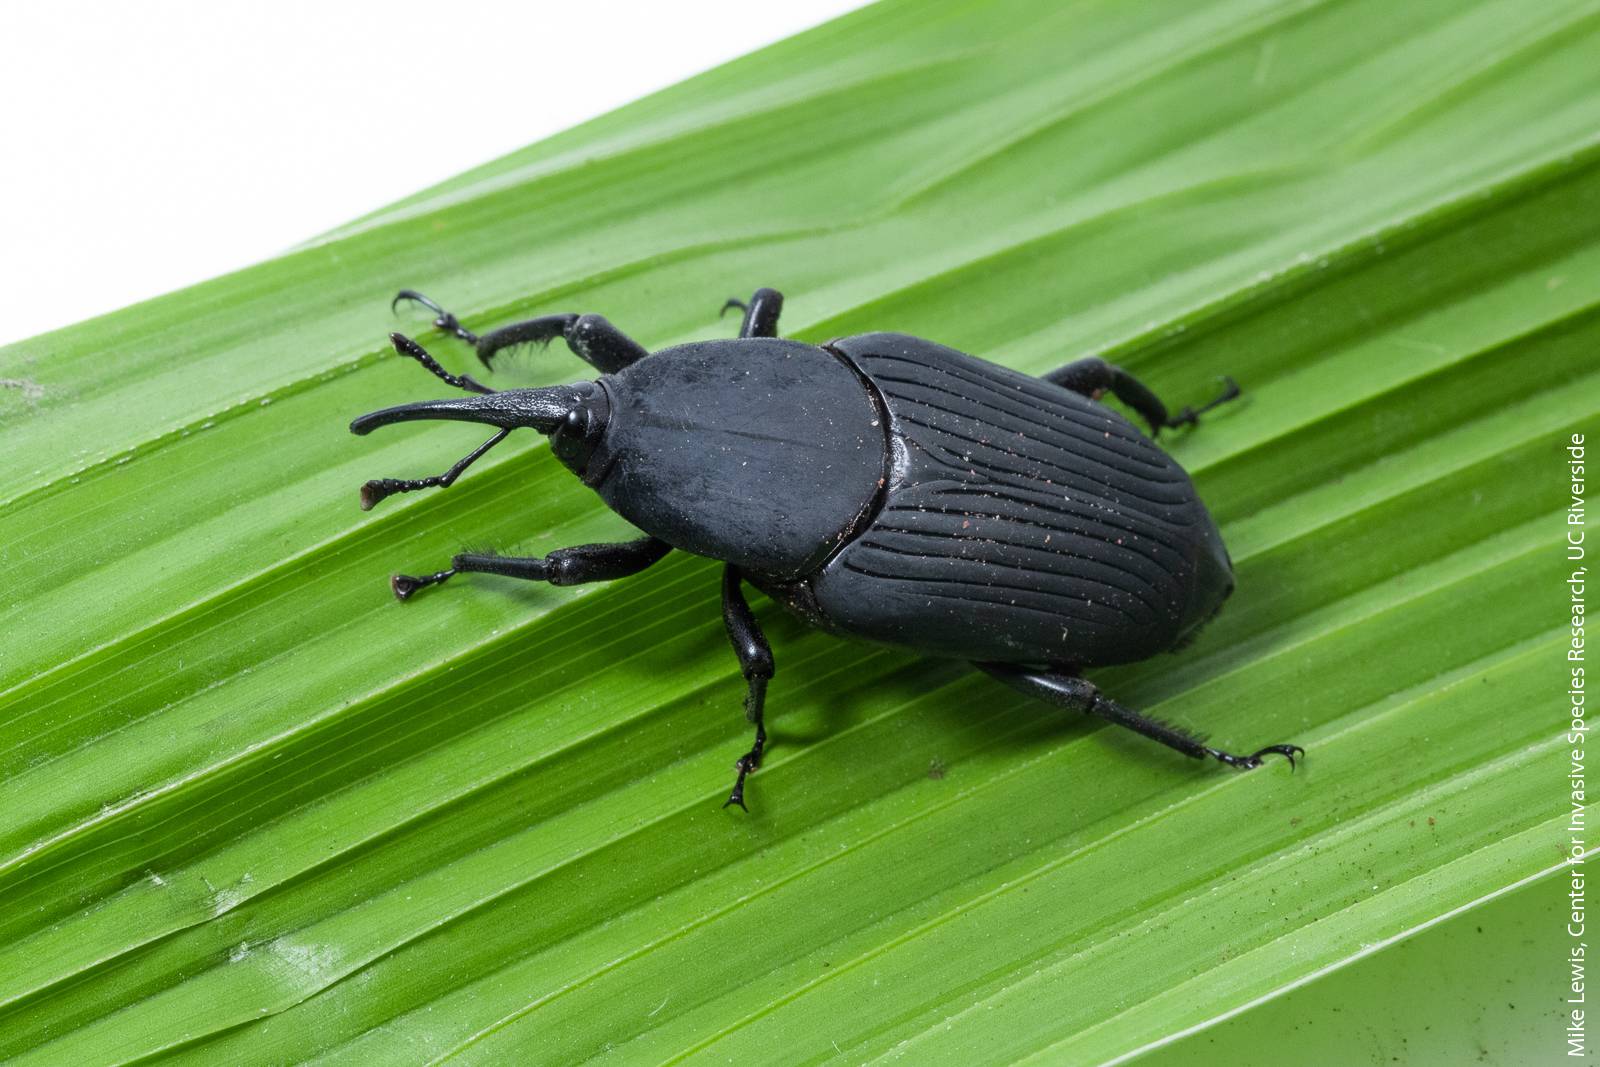 South American palm weevil is killing ornamental Canary Islands date palms in Southern California and poses a serious threat for edible date producers in the Coachella Valley.